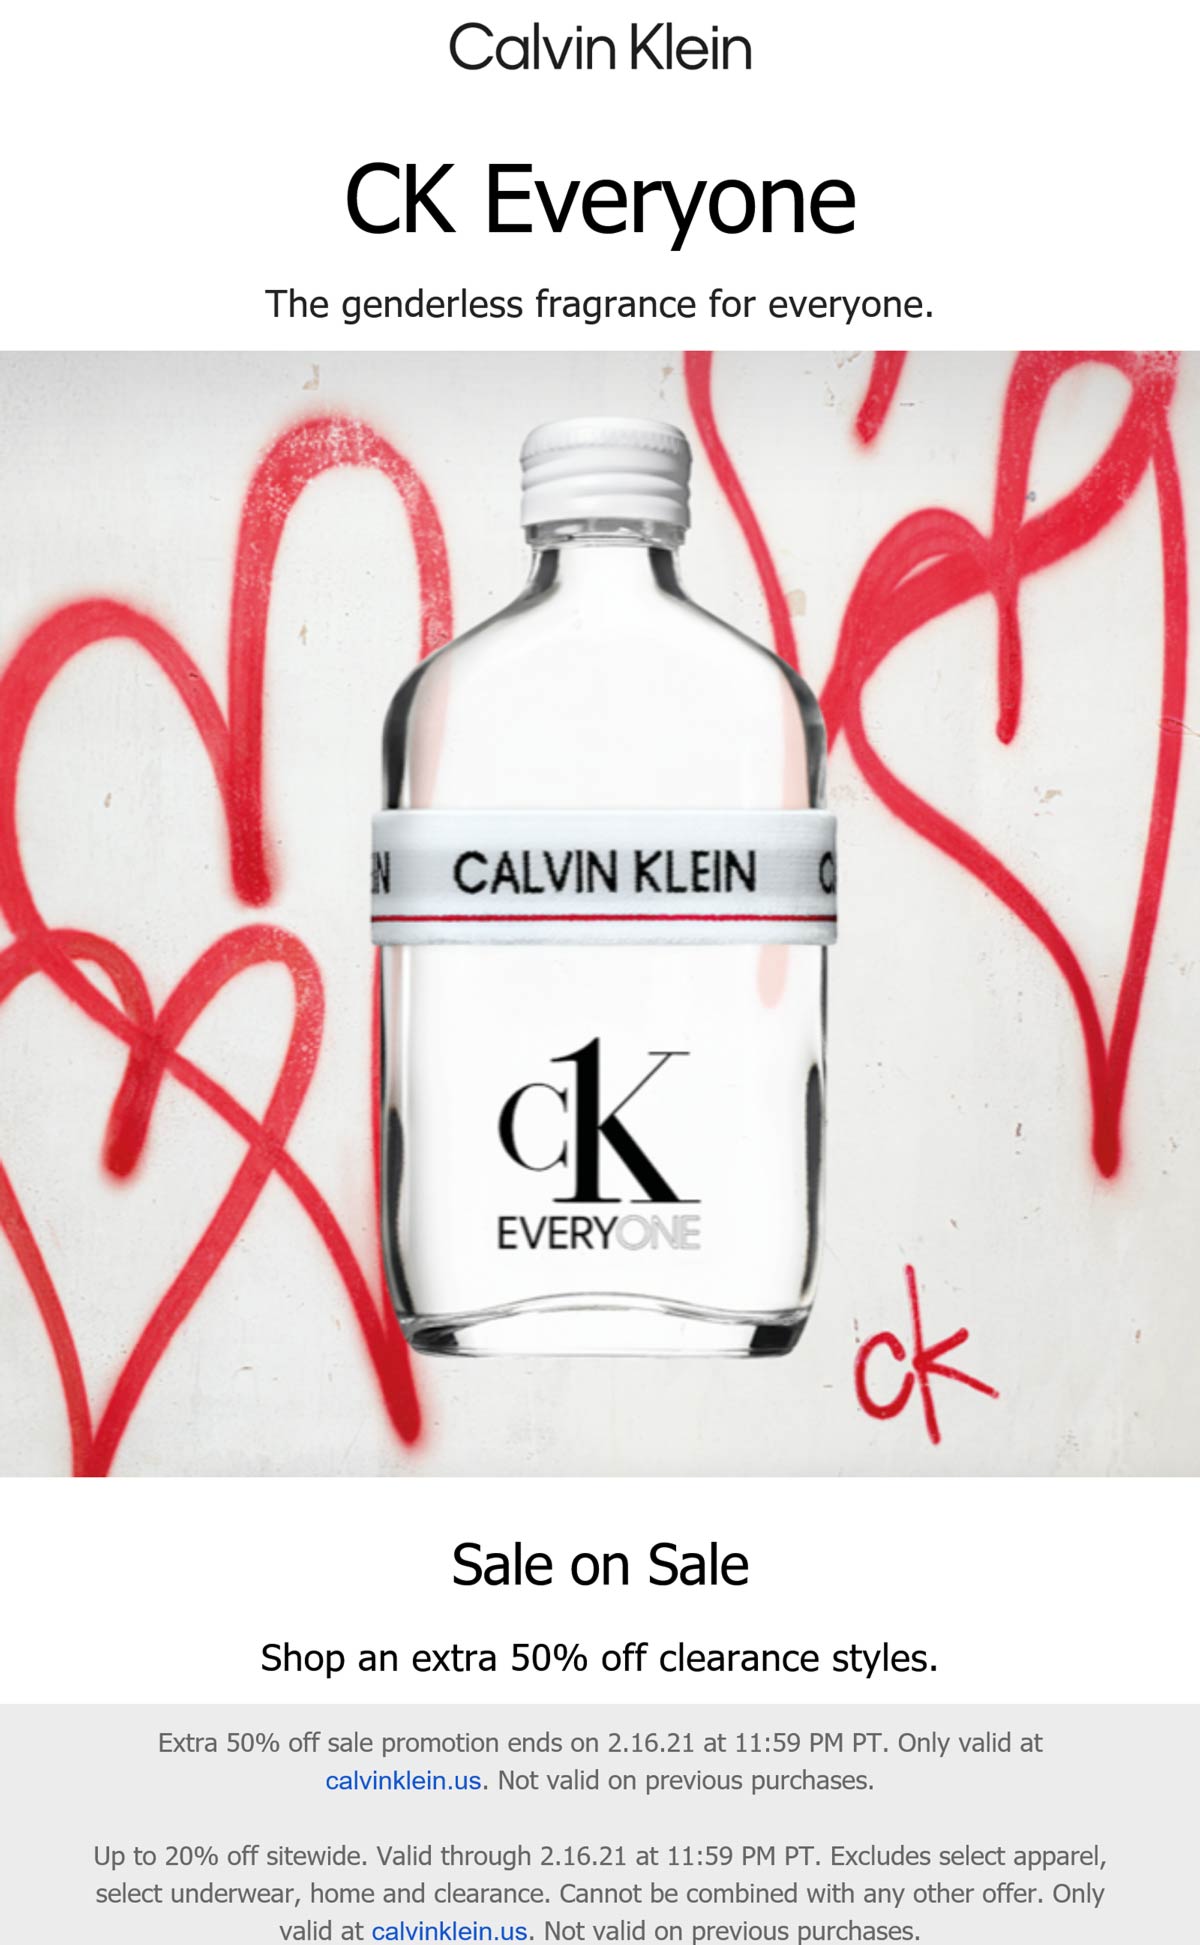 Extra 50 off clearance styles online at Calvin Klein calvinklein